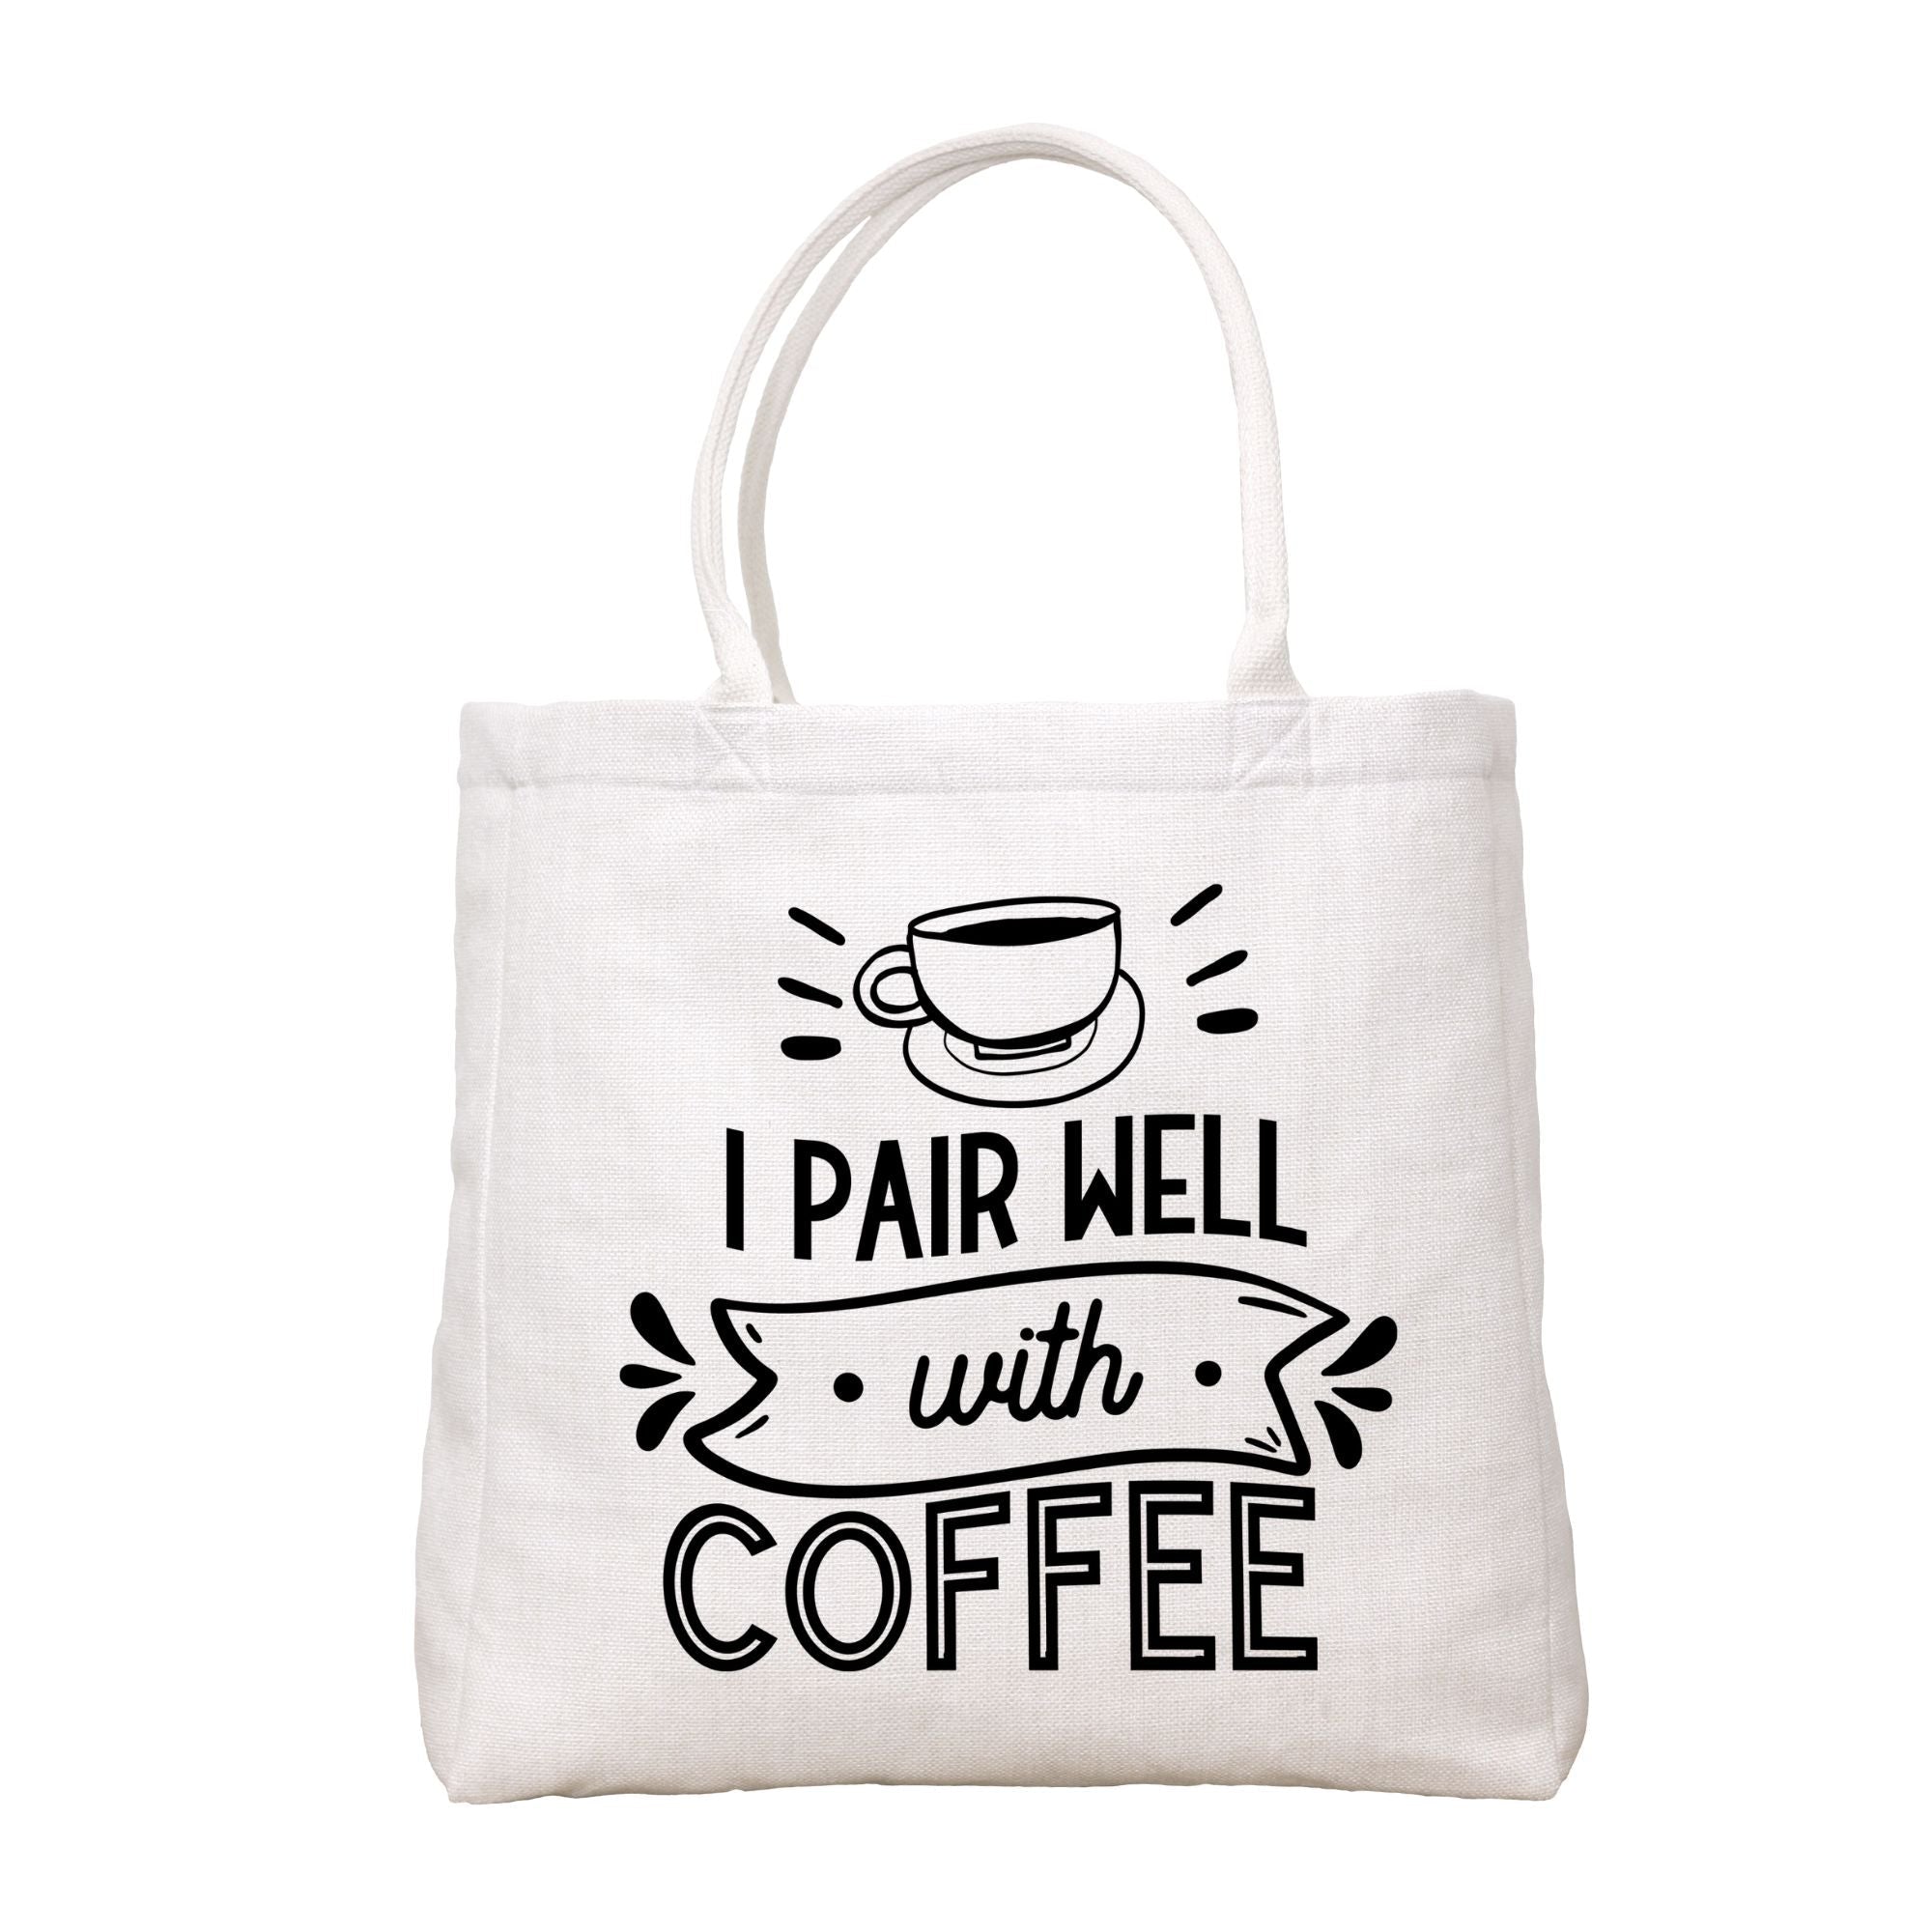 I Pair Well Tote Bag